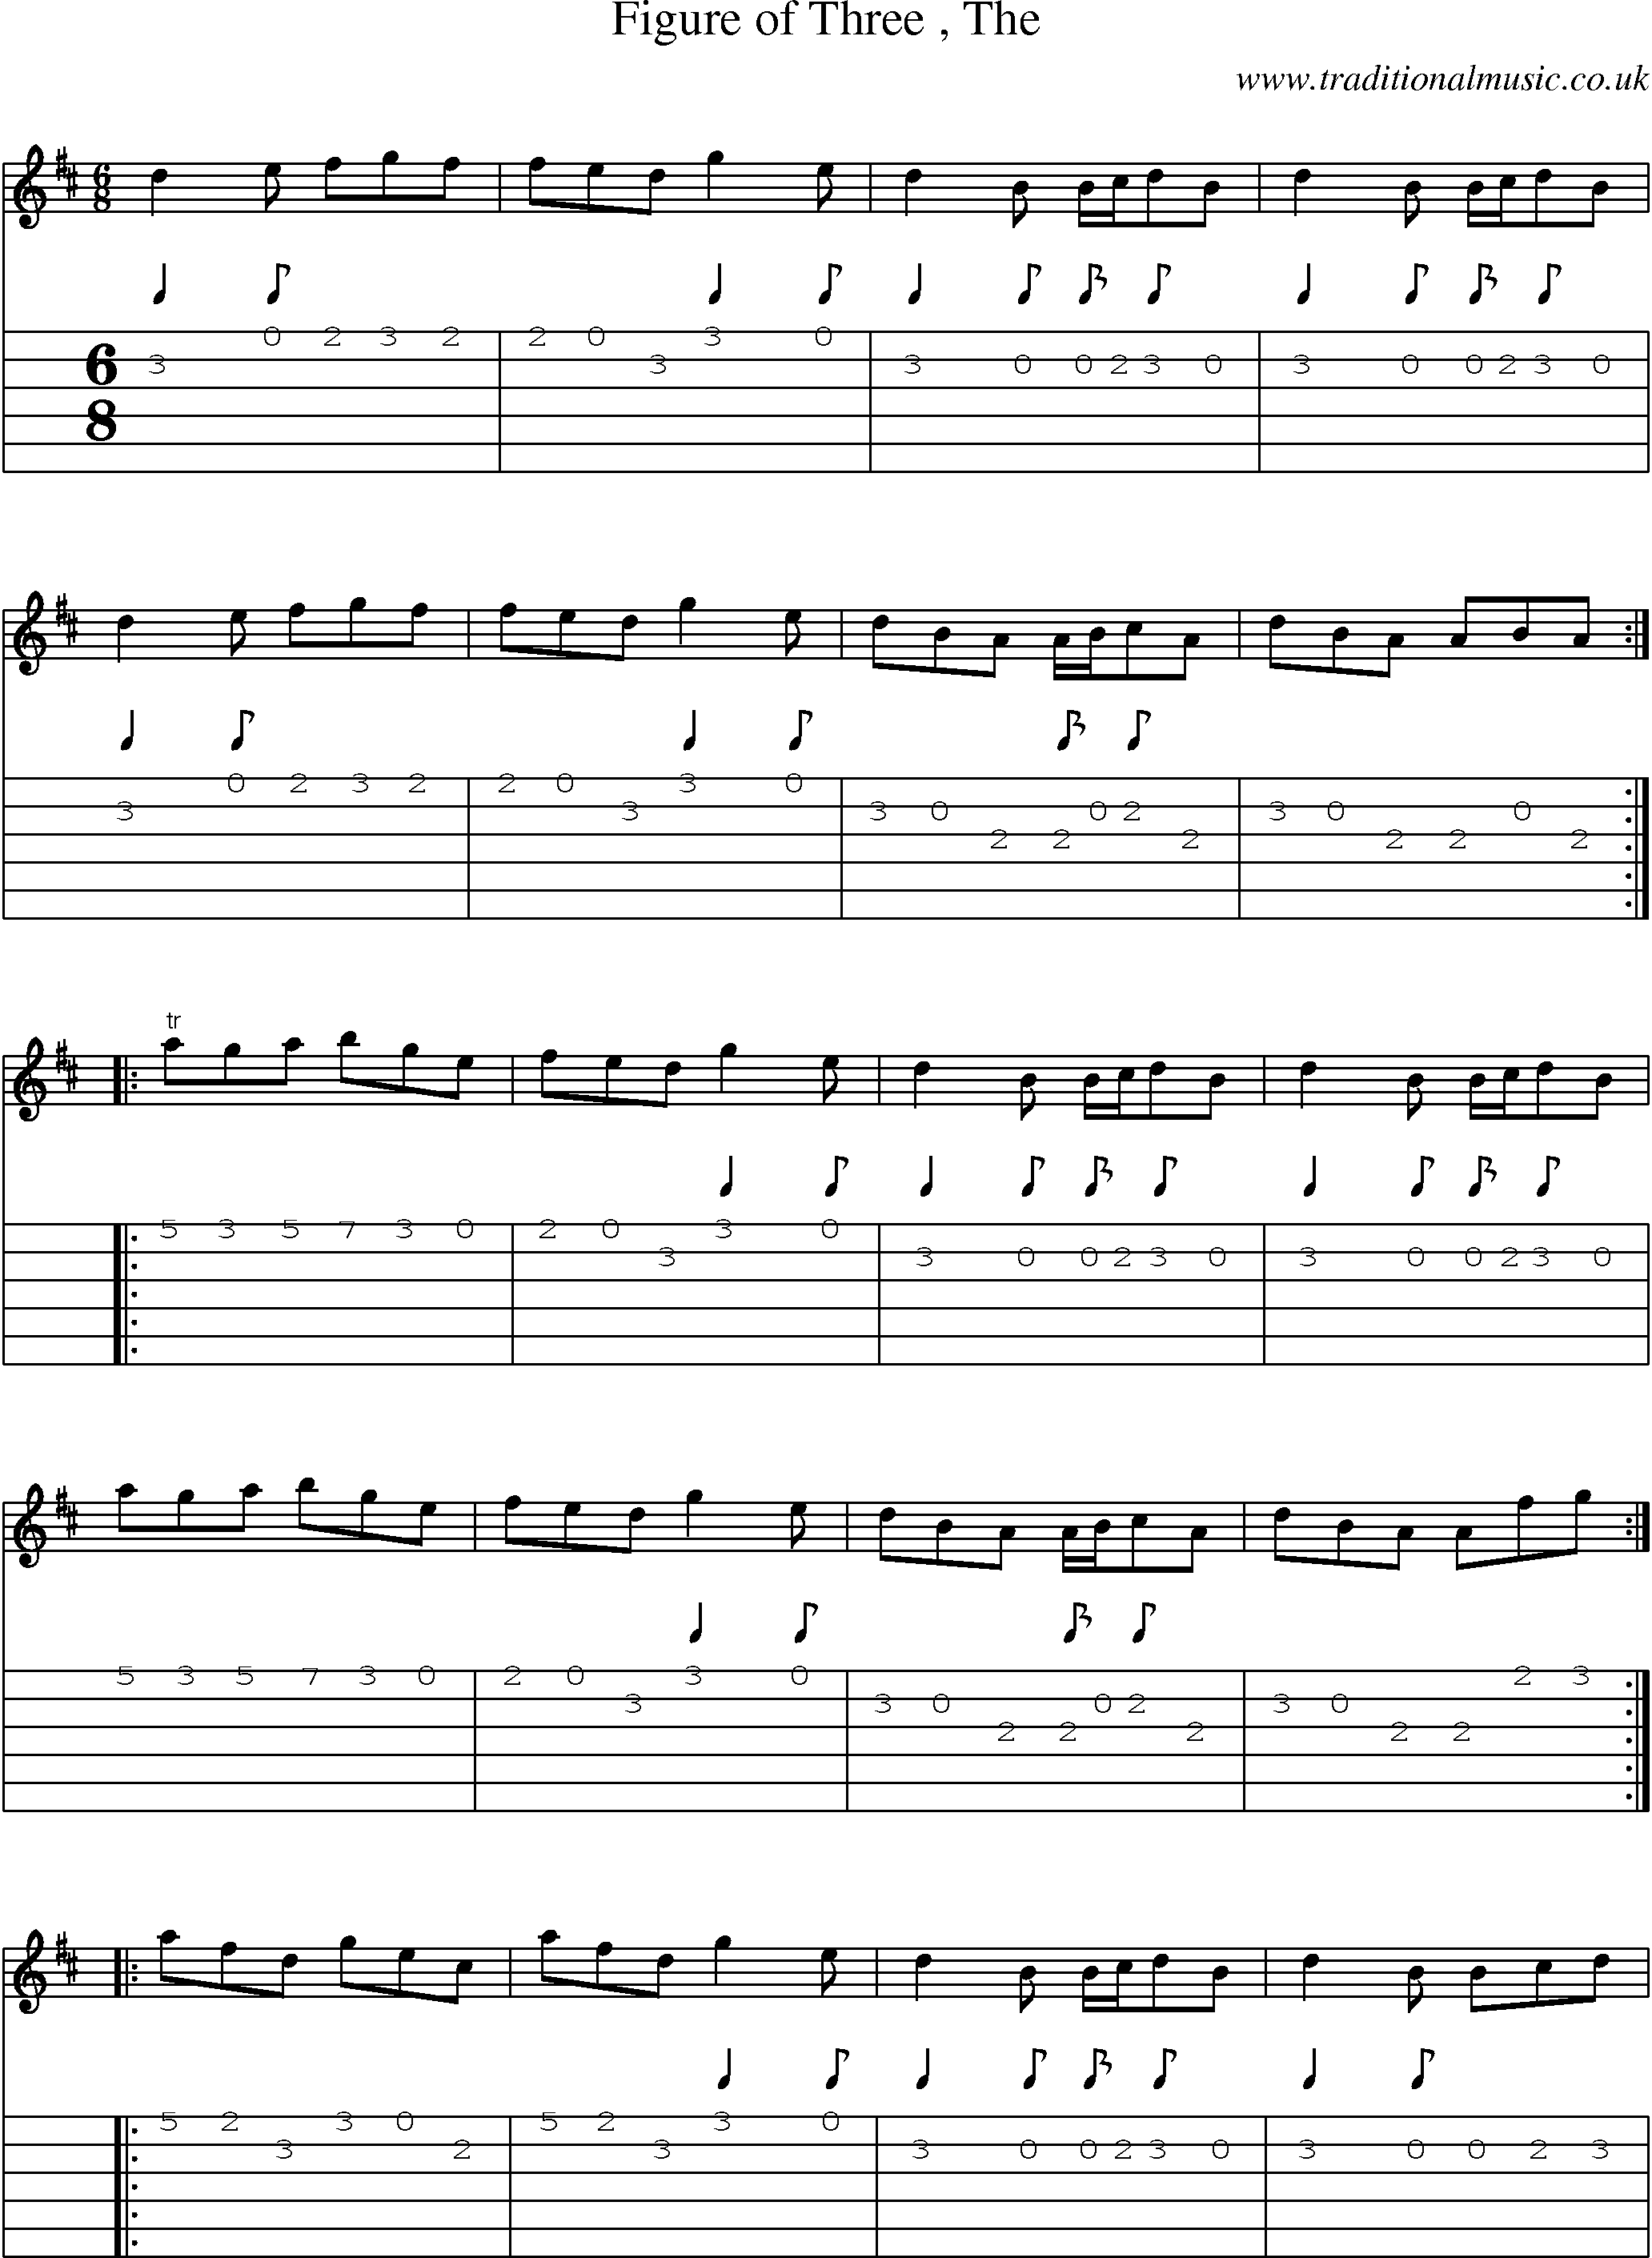 Music Score and Guitar Tabs for Figure Of Three